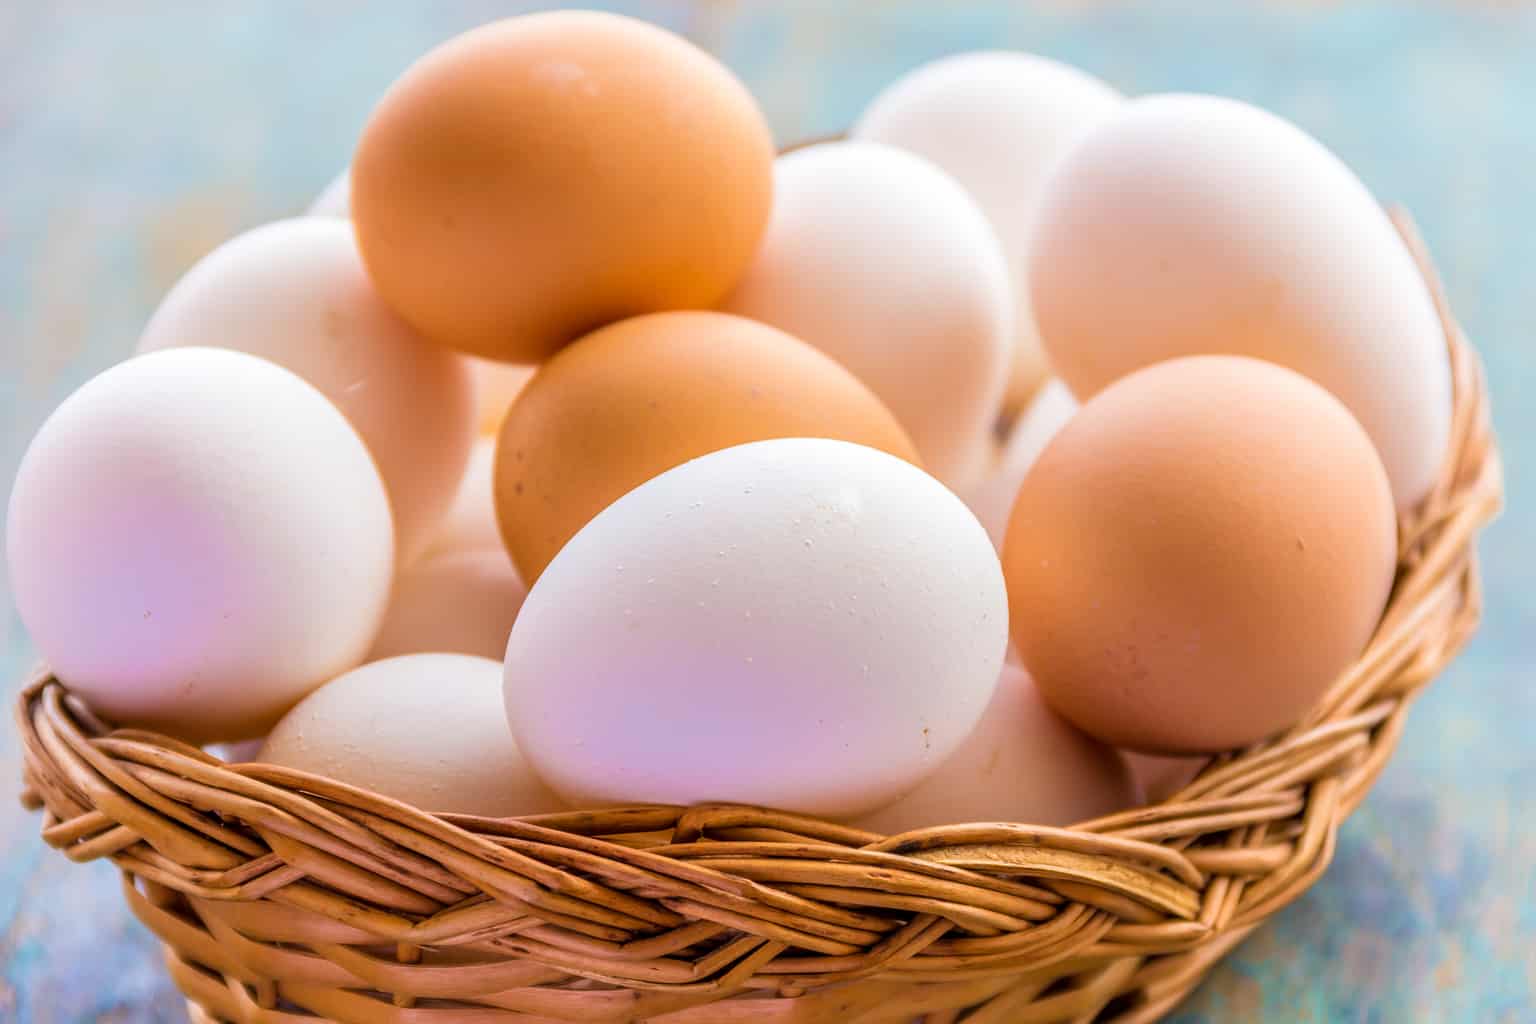 Eggs this way = grow 40% more muscle